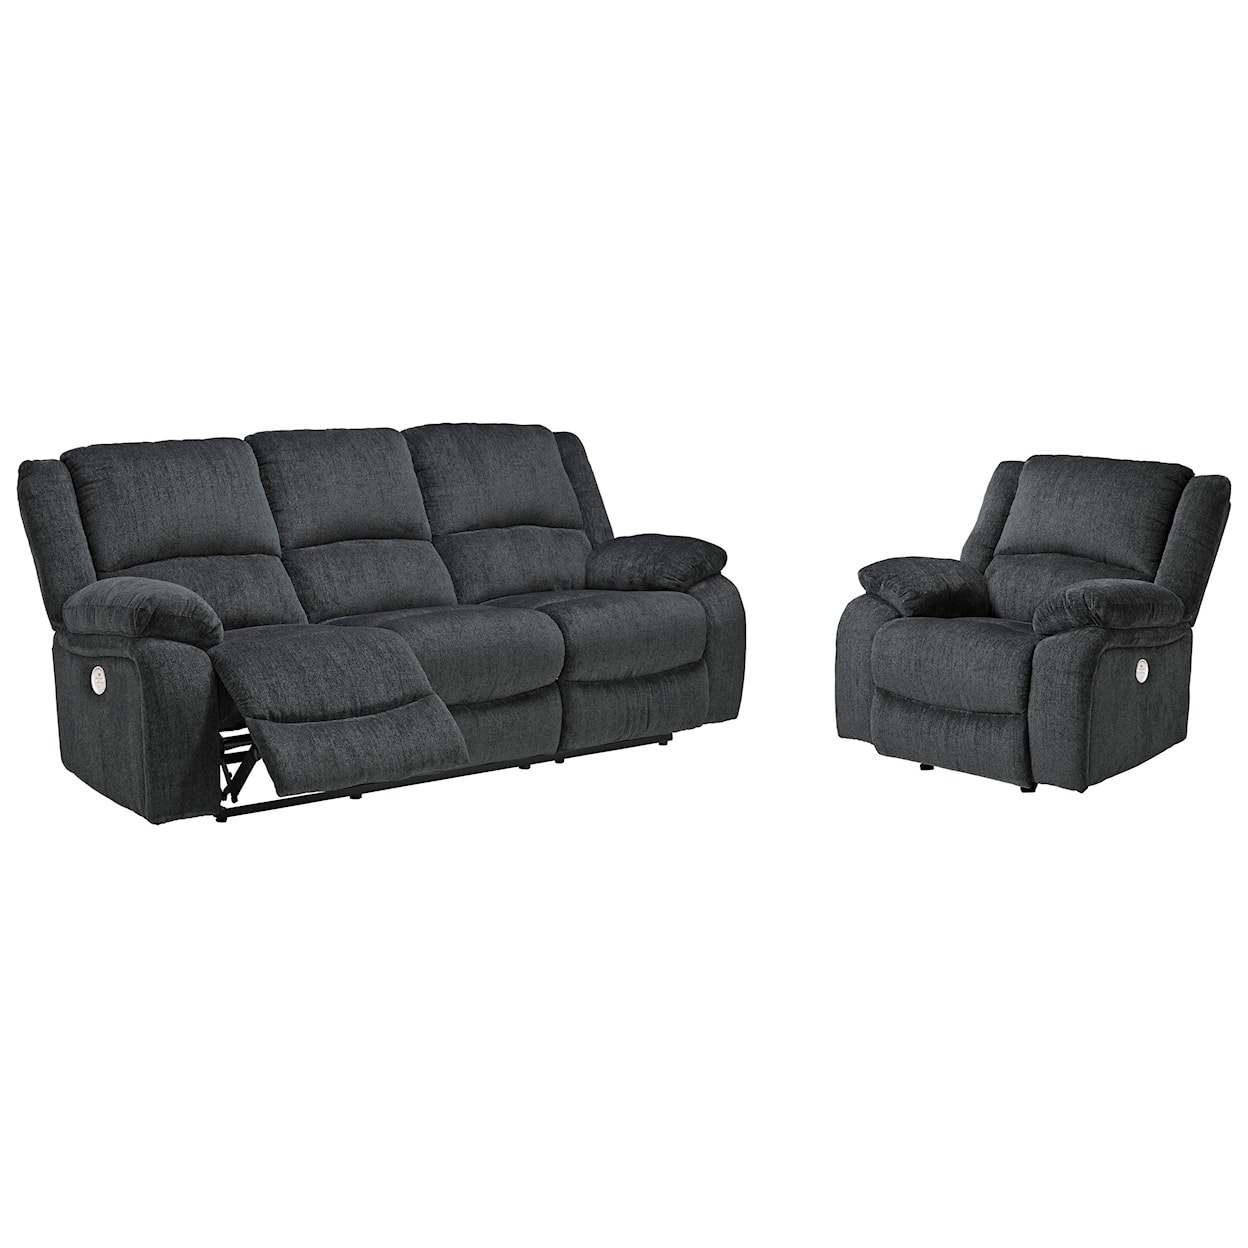 Signature Design by Ashley Draycoll 2 Piece Power Reclining Living Room Set